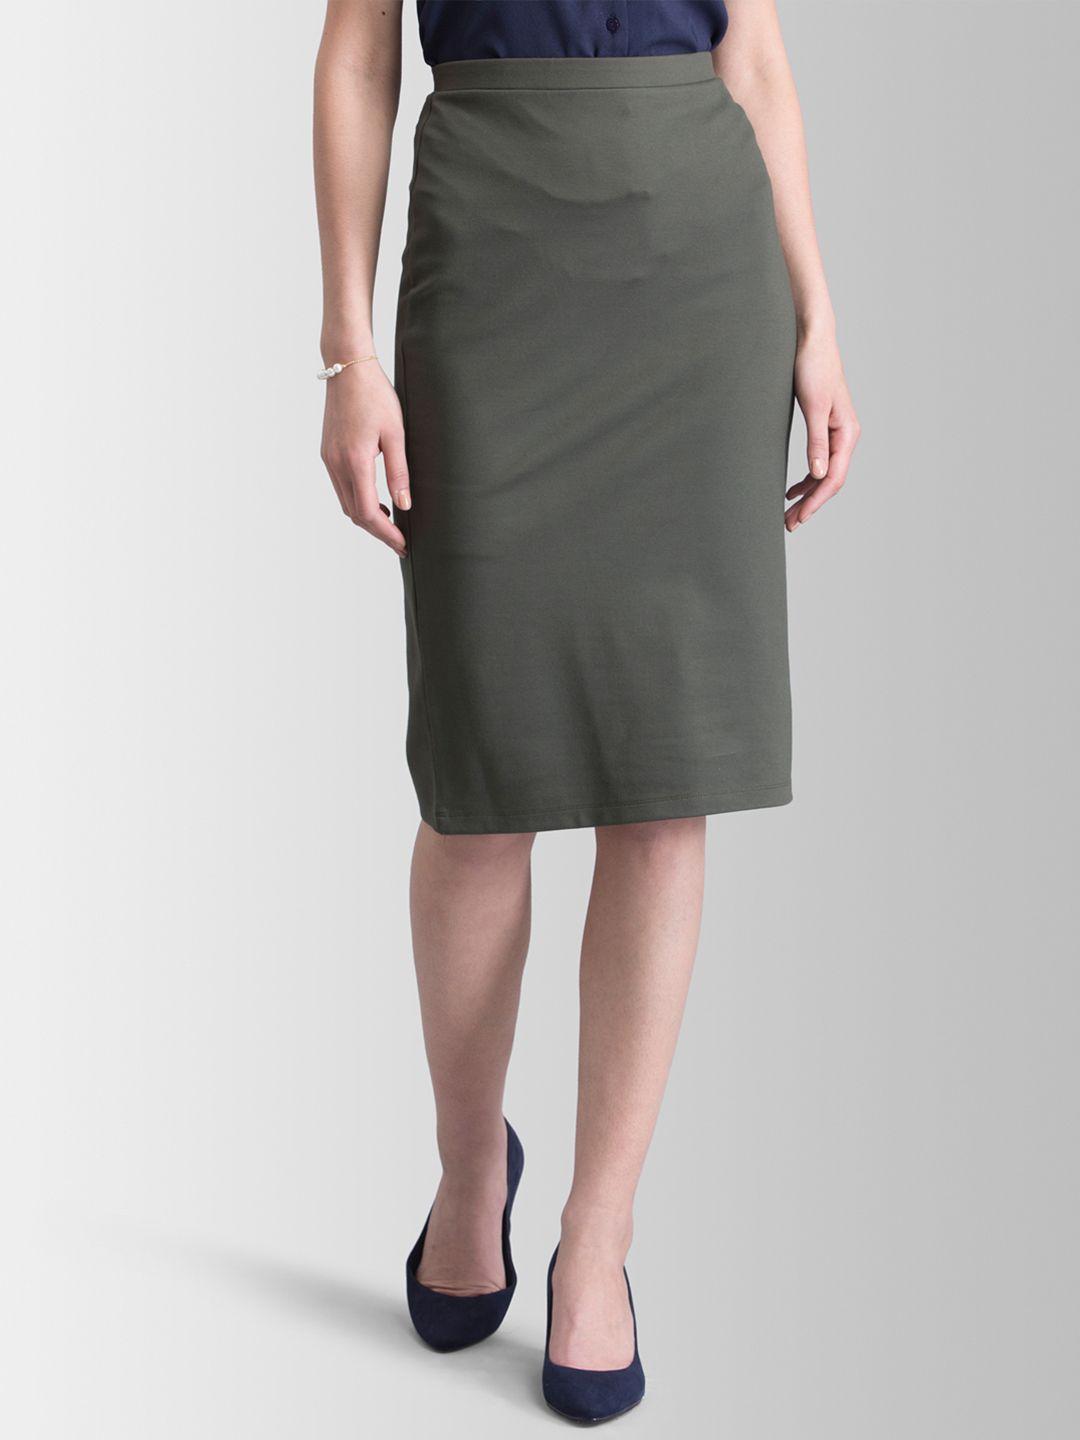 fablestreet olive green knitted pencil skirt